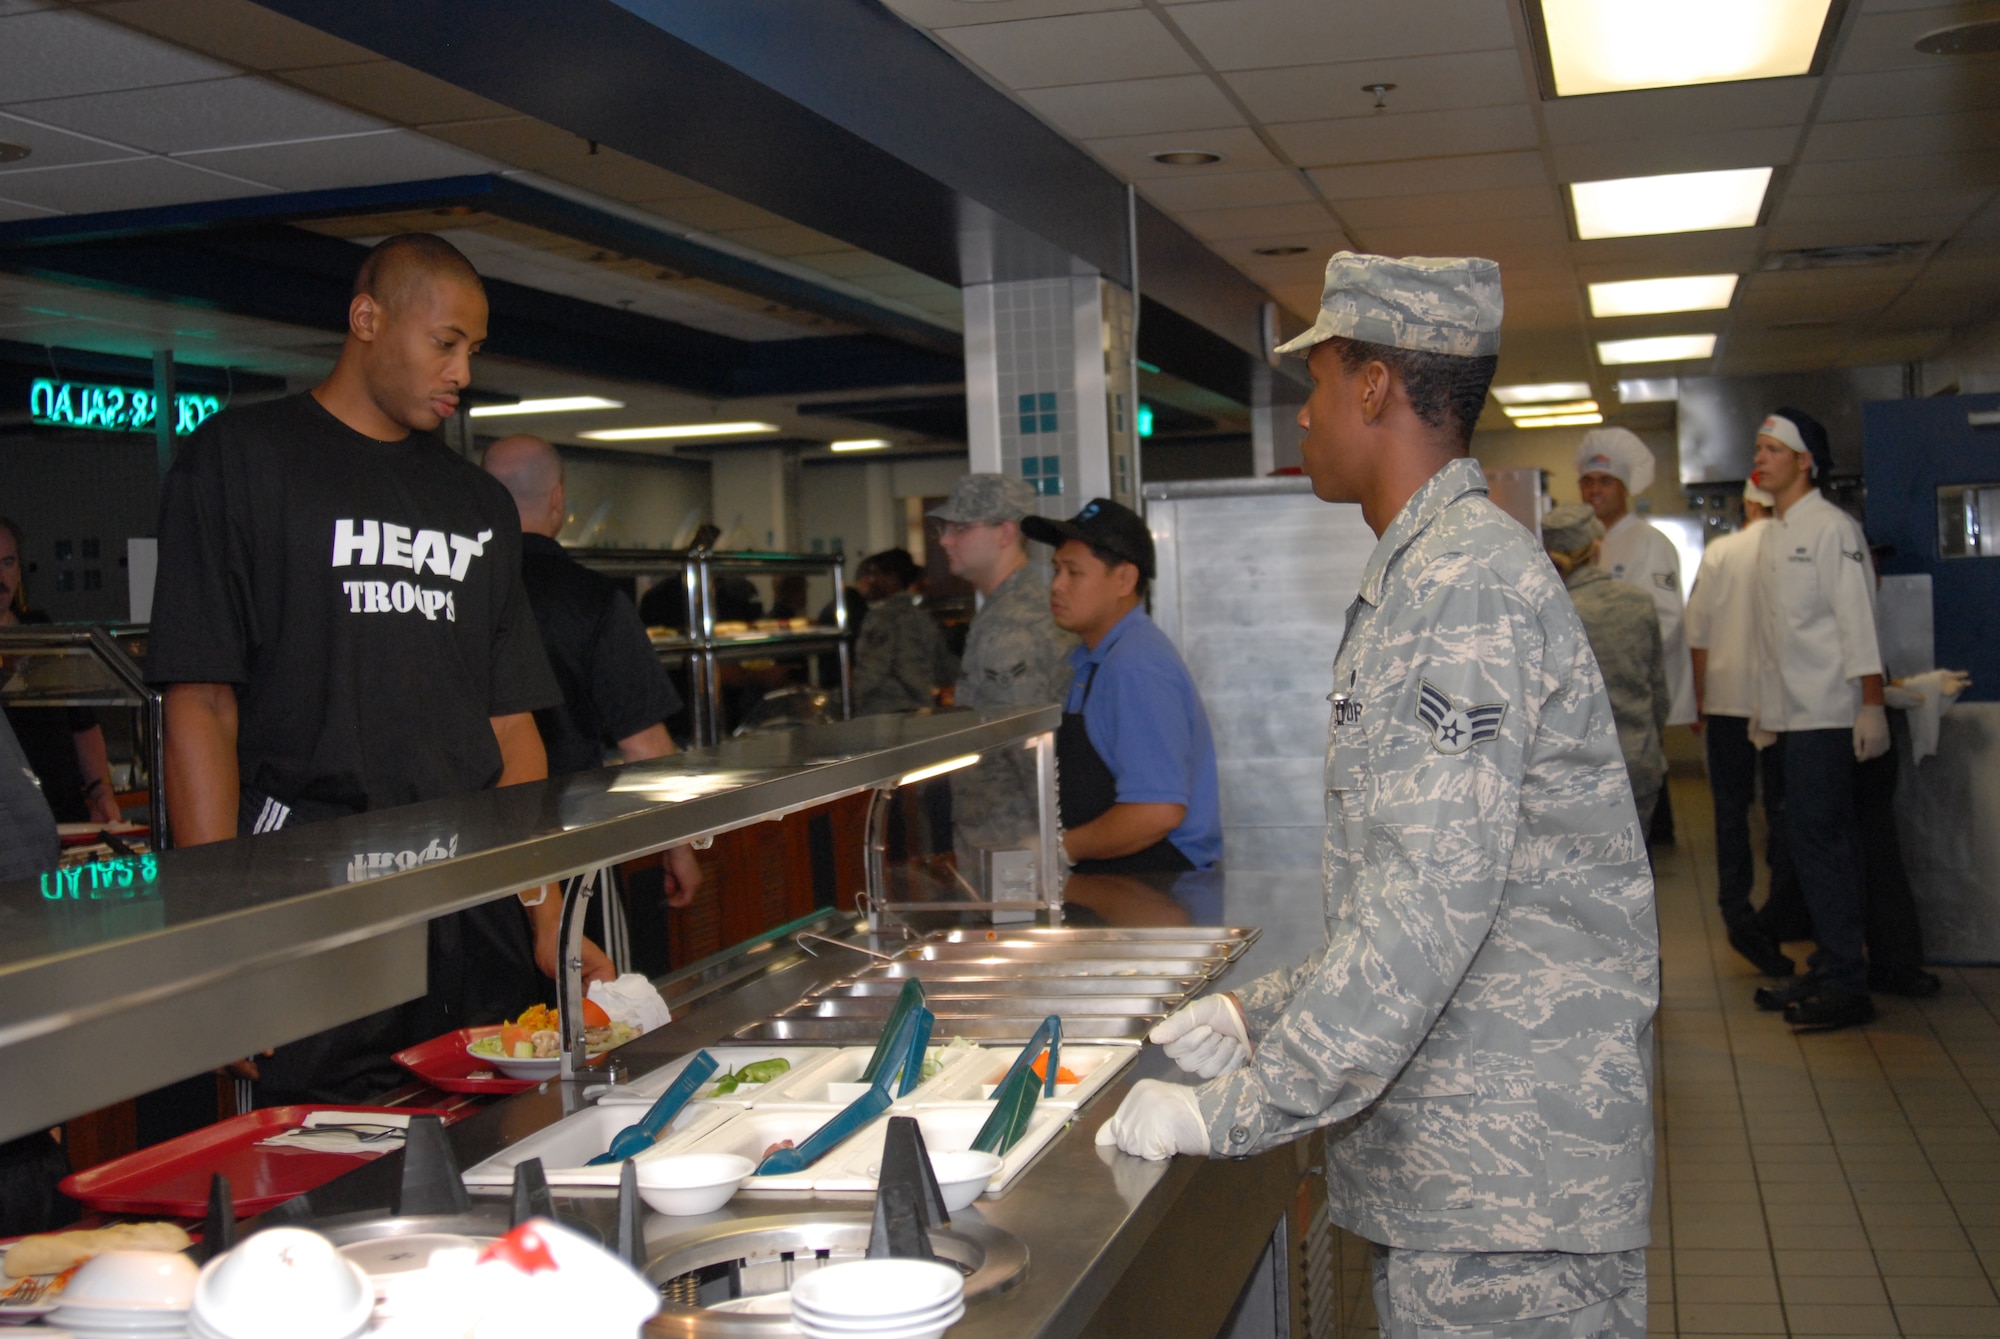 U. S. Air Force Senior Airman Javan King, 1st Special Operations Force Support Squadron food service specialist, gets a stir-fry order from Jamal Magloire, a Miami HEAT center, during a surprise lunch visit with Airmen at the Reef Dining Facility, Hurlburt Field, Fla., Sept. 30, 2010. The HEAT players and staff took time from their 2010 Training Camp to meet with Airmen and learn the missions of Hurlburt Field and Eglin Air Force Base.  (DoD photo by U. S. Air Force Staff Sgt. Orly N. Tyrell/Released)